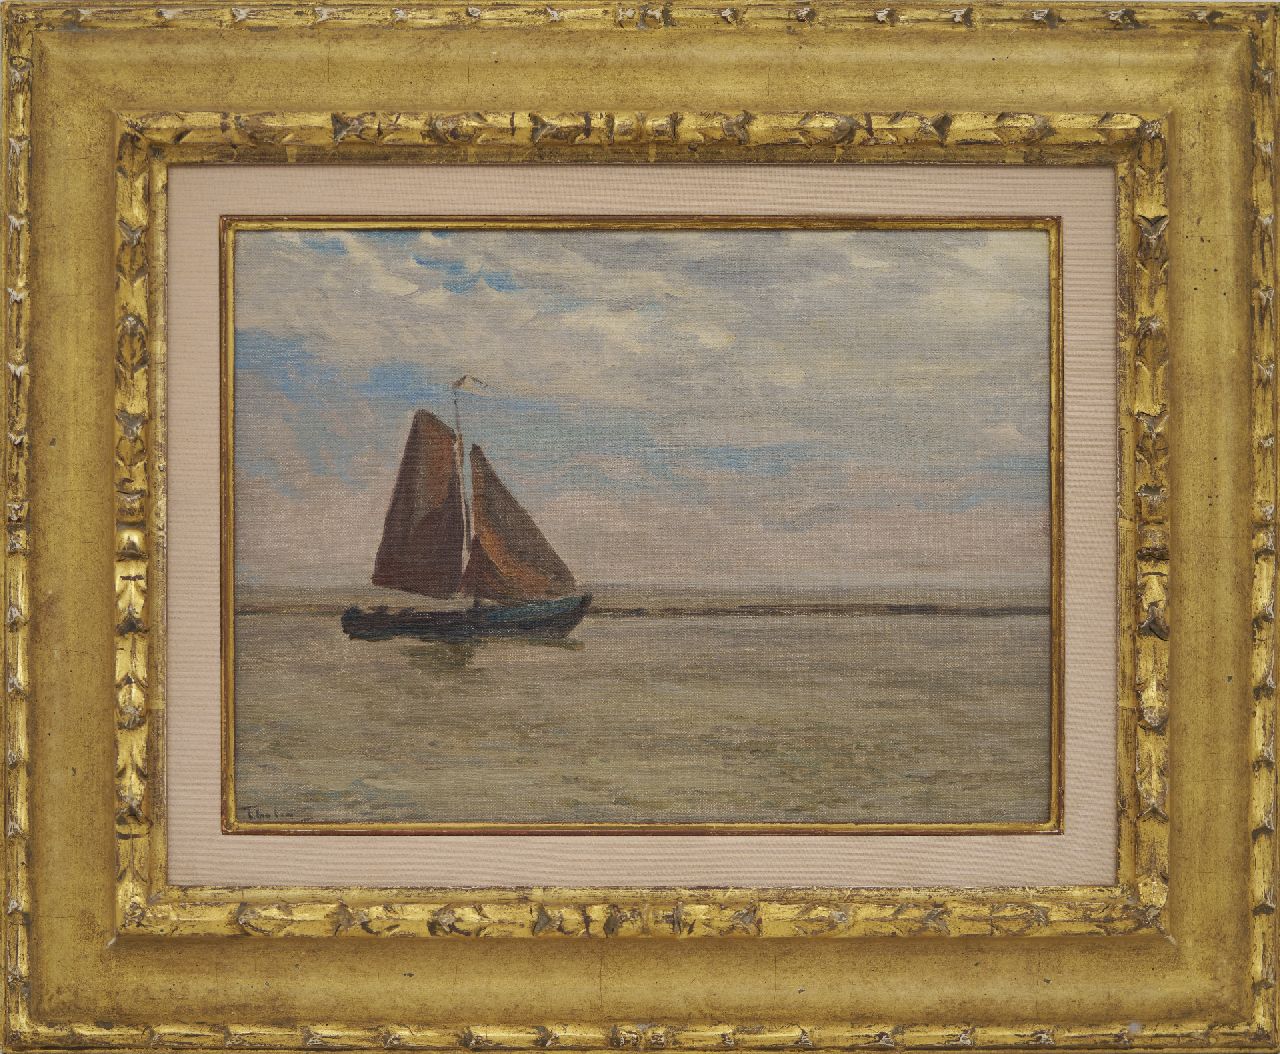 Tholen W.B.  | Willem Bastiaan Tholen | Paintings offered for sale | Fishing boat at sea,probably 'Krabbersgat', near Enkhuizen, oil on canvas laid down on panel 25.4 x 34.6 cm, signed l.l.